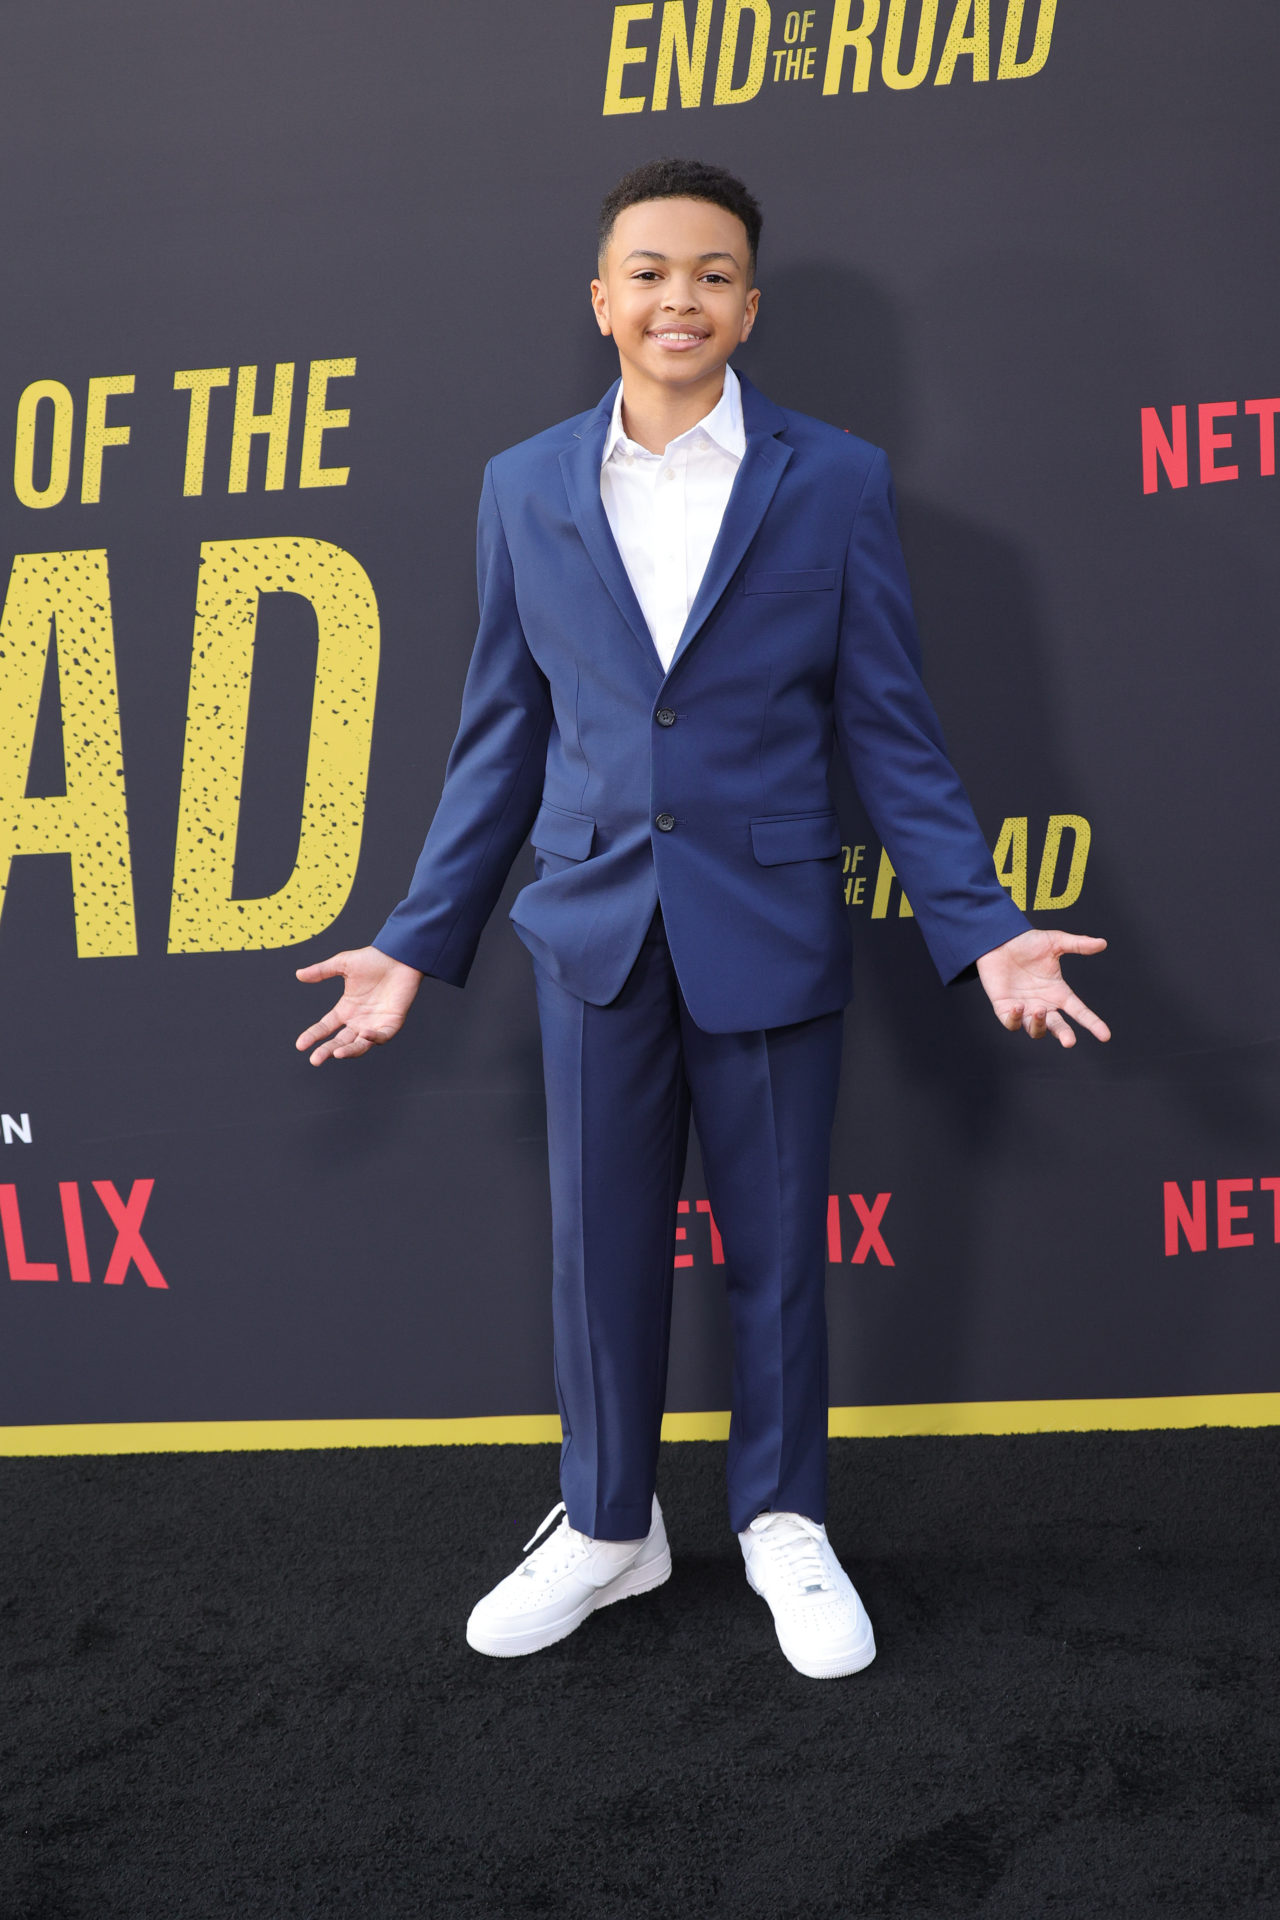 Los Angeles Premiere Of Netflix's "End Of The Road"